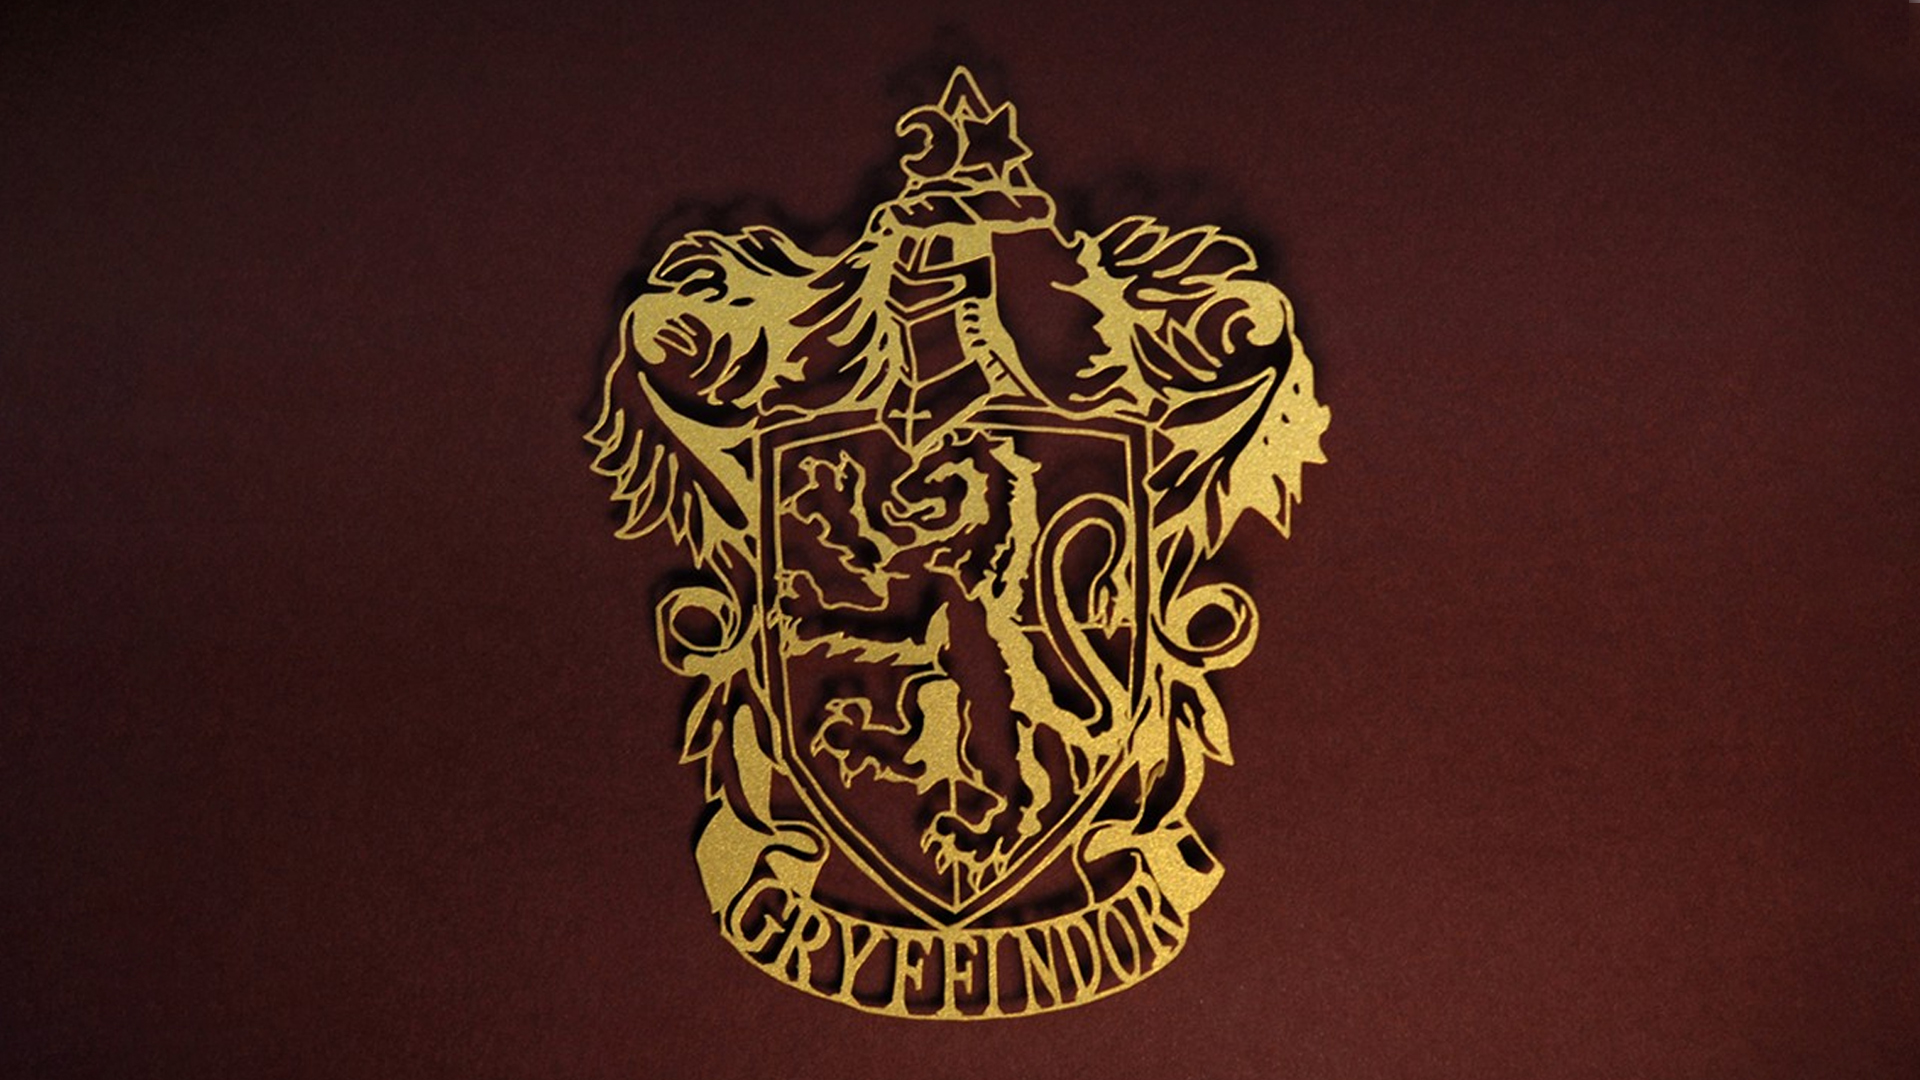 Ravenclaw Pottermore Wallpapers